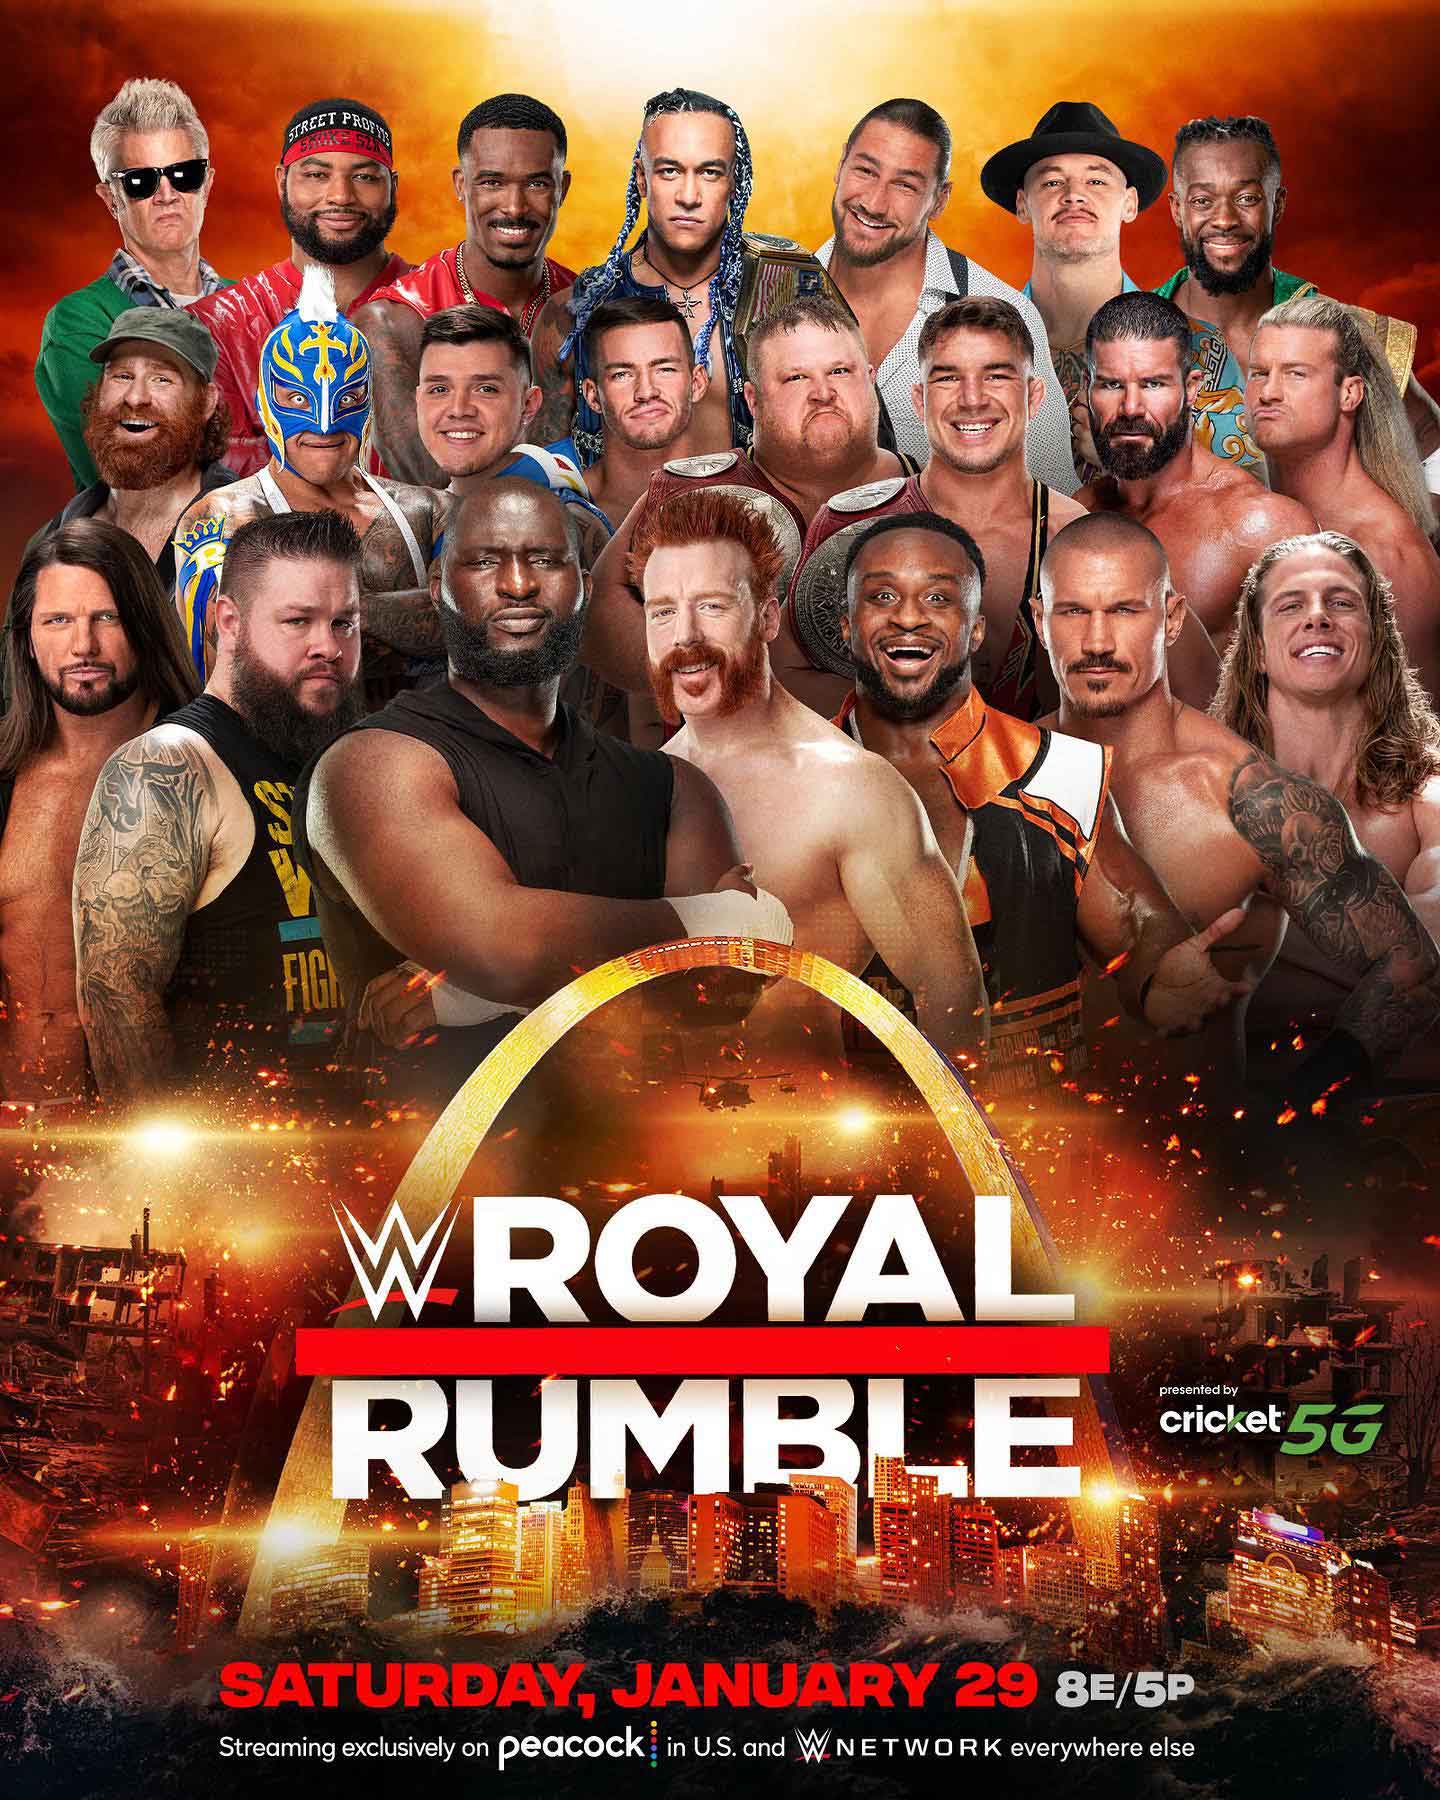 WWE Royal Rumble 2022 PPV Match Details, Live Streaming Details